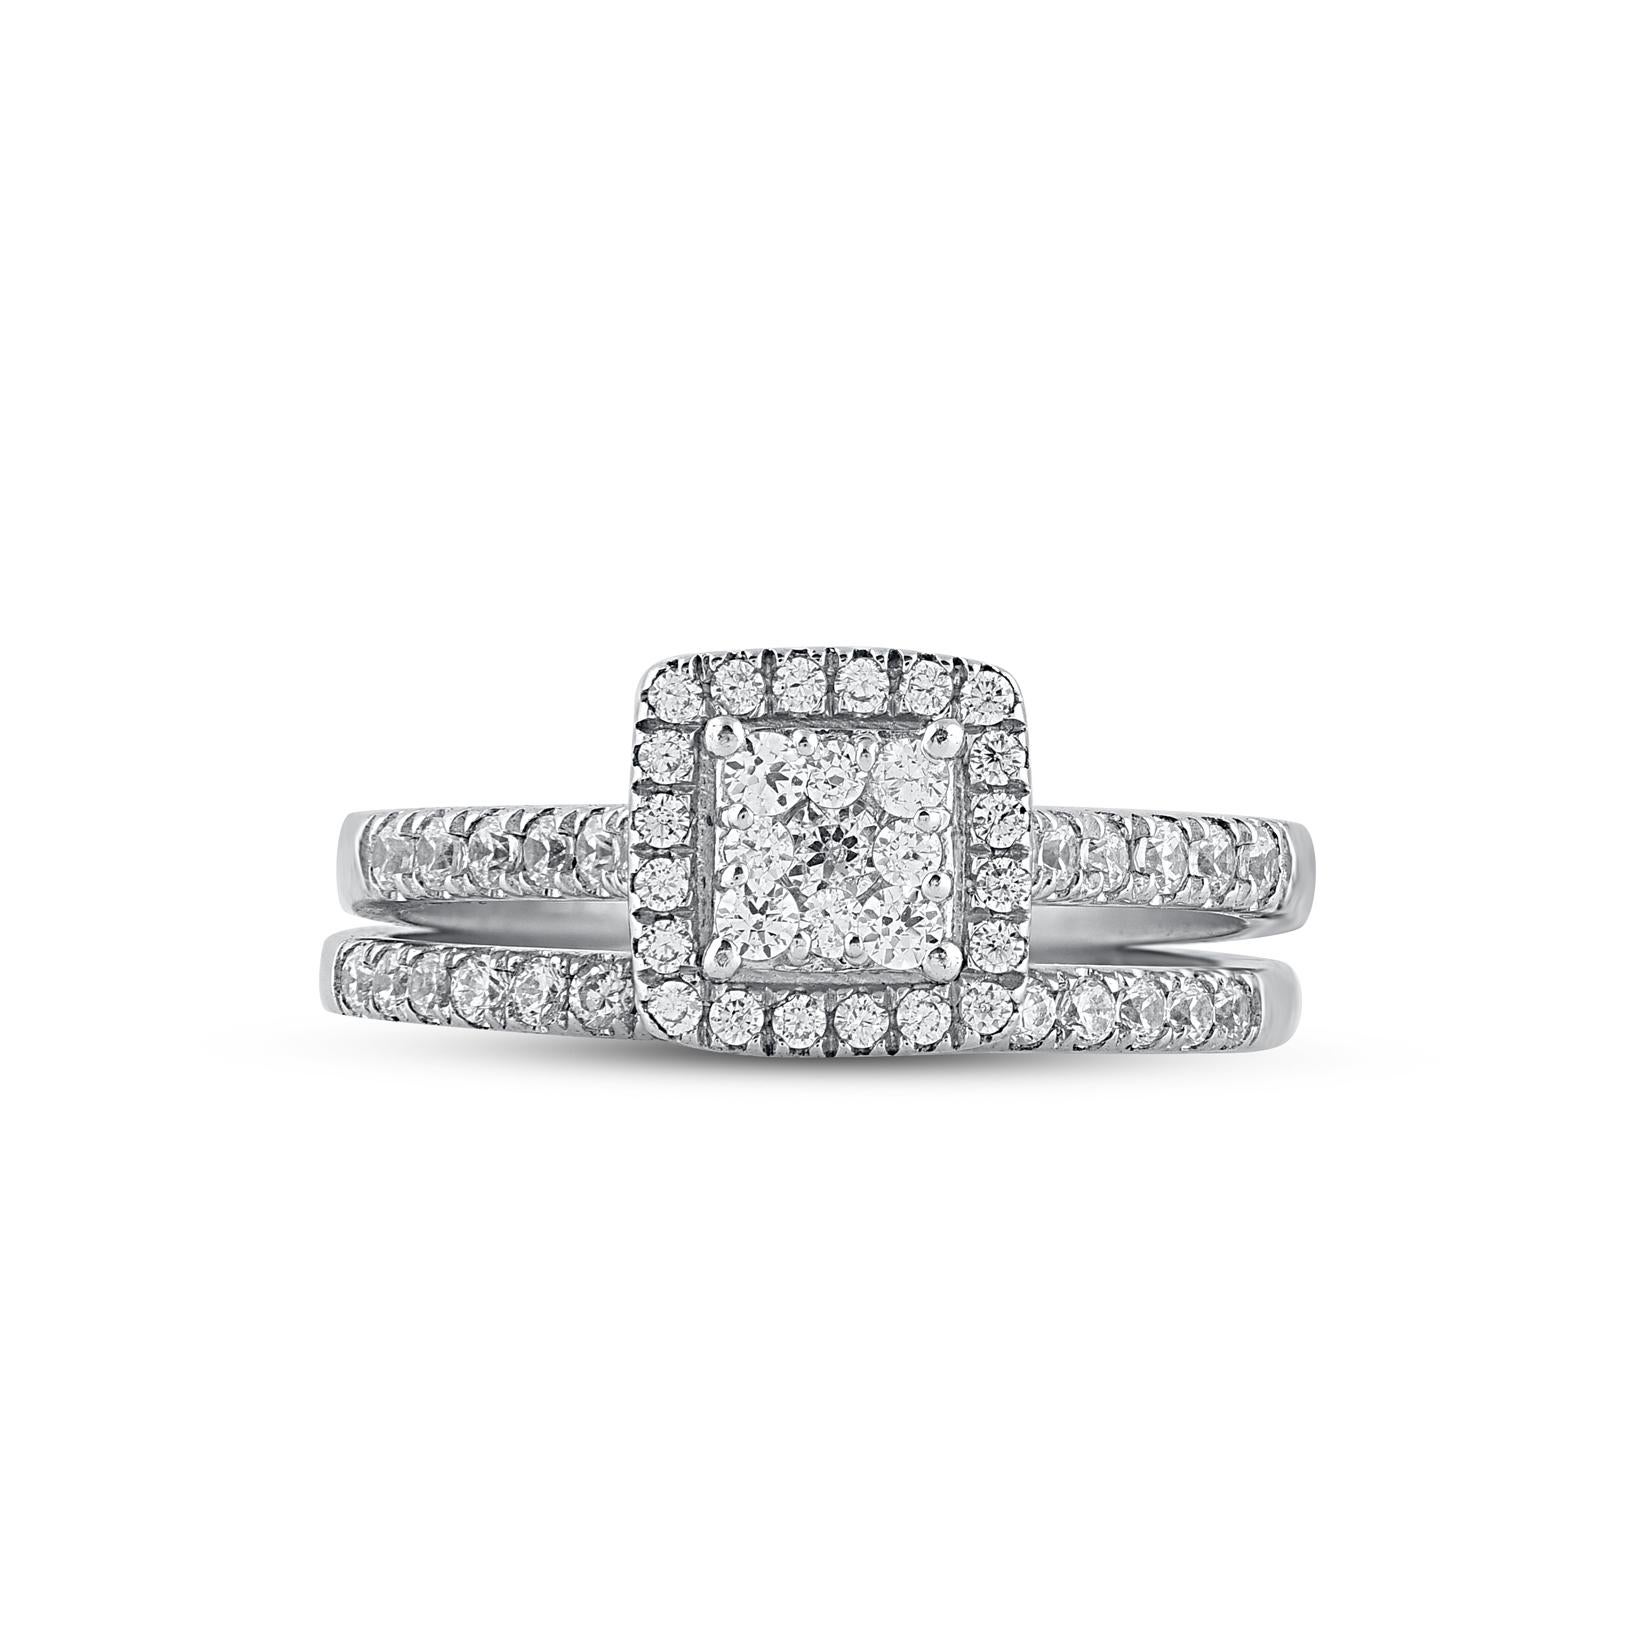 On that special day, express all your love with this elegant and dazzling brilliant cut diamond bridal set. Crafted in 14 Karat white gold. This wedding ring features a sparkling 69 brilliant cut and single cut round diamonds beautifully set in